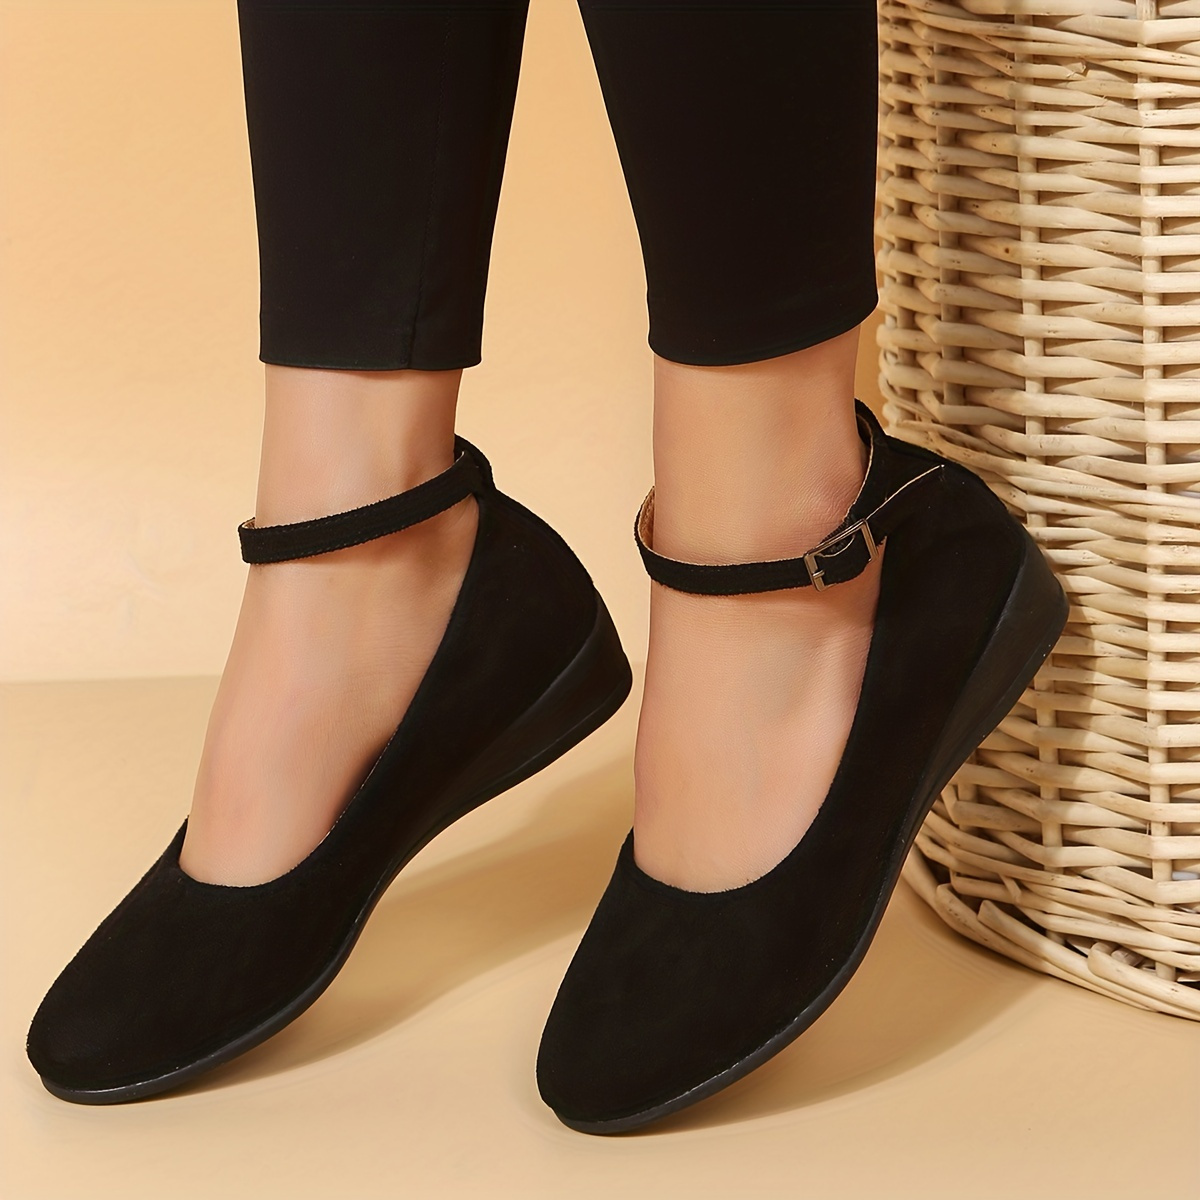 nsendm Female Shoes Adult Semi formal Shoes for Women Flat Front Work  Loafers Casual Shoes Flat Ballet Women Shoes Black 8 